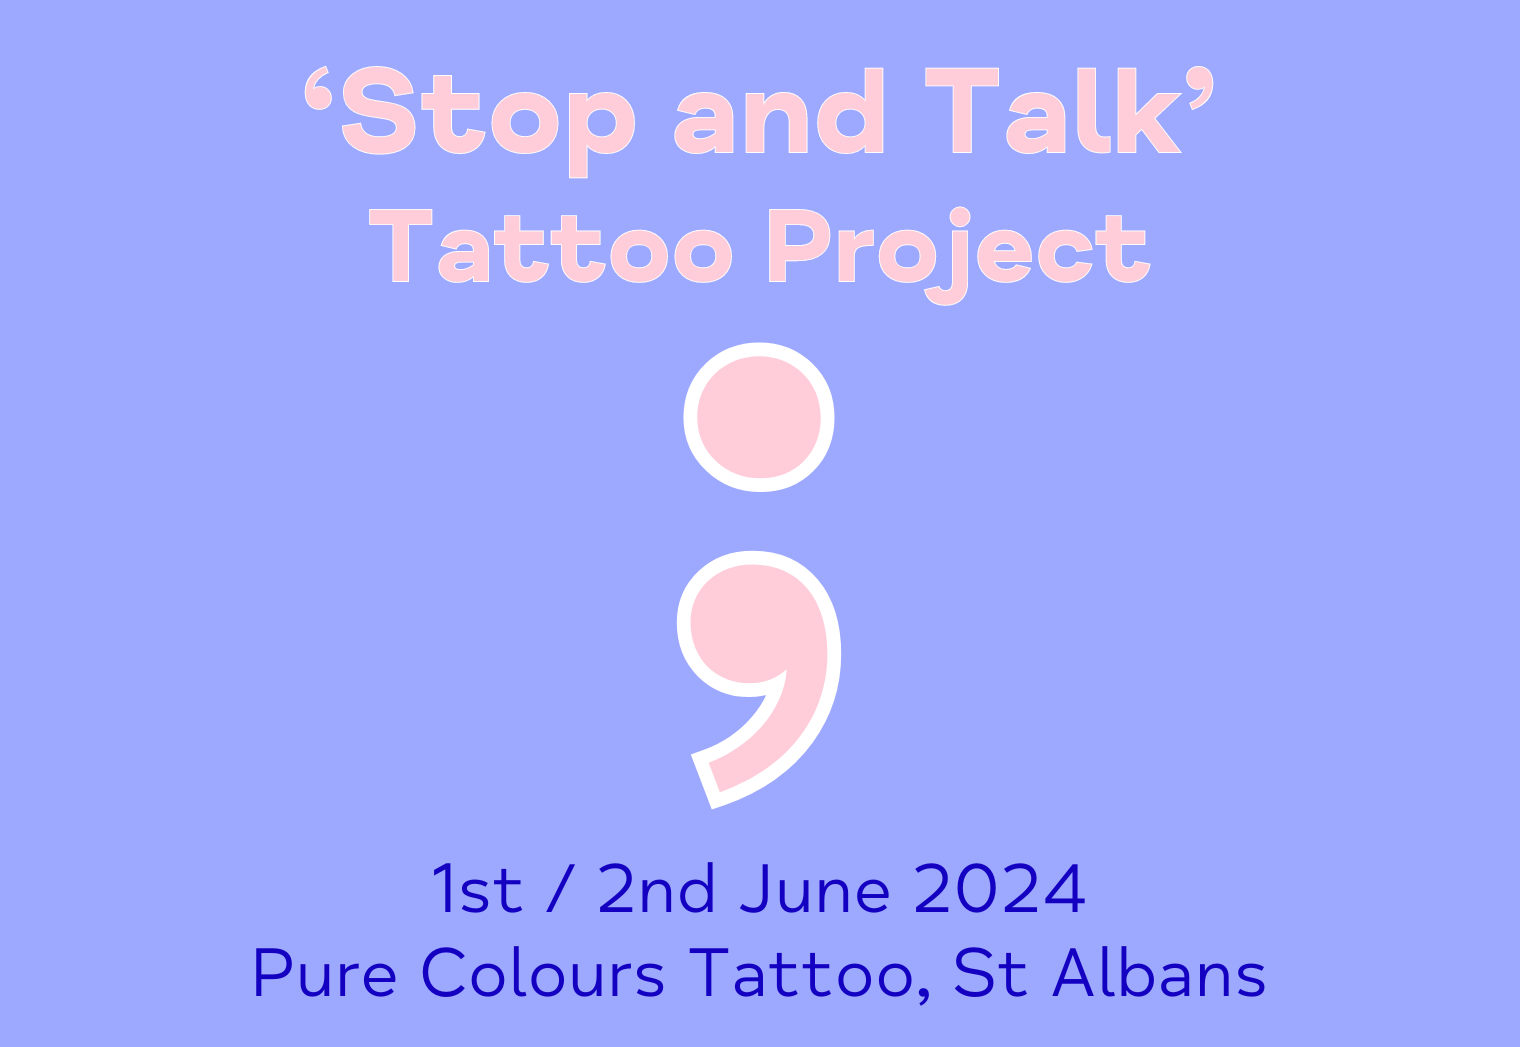 ‘Stop and Talk’ Tattoo Project